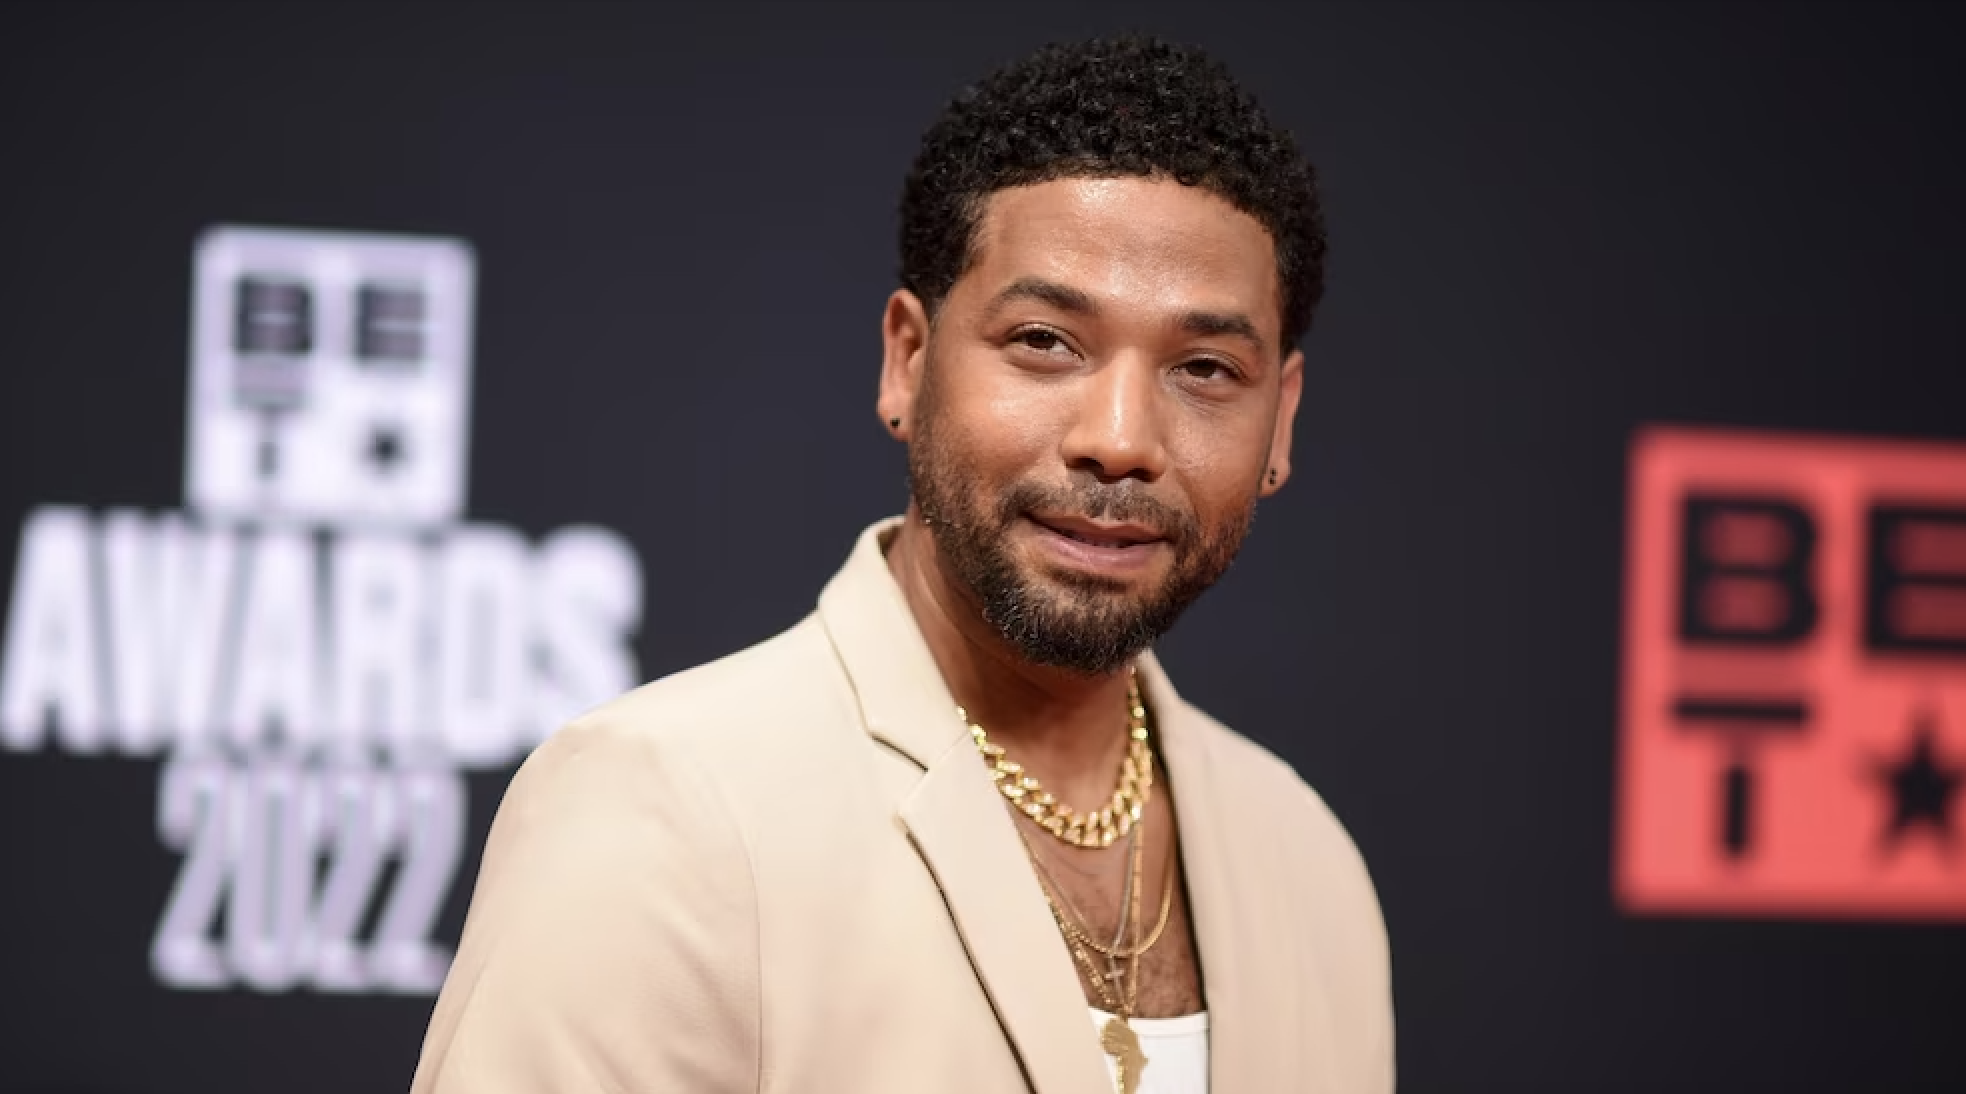 Illinois appeals court affirms actor Jussie Smollett’s convictions and jail sentence